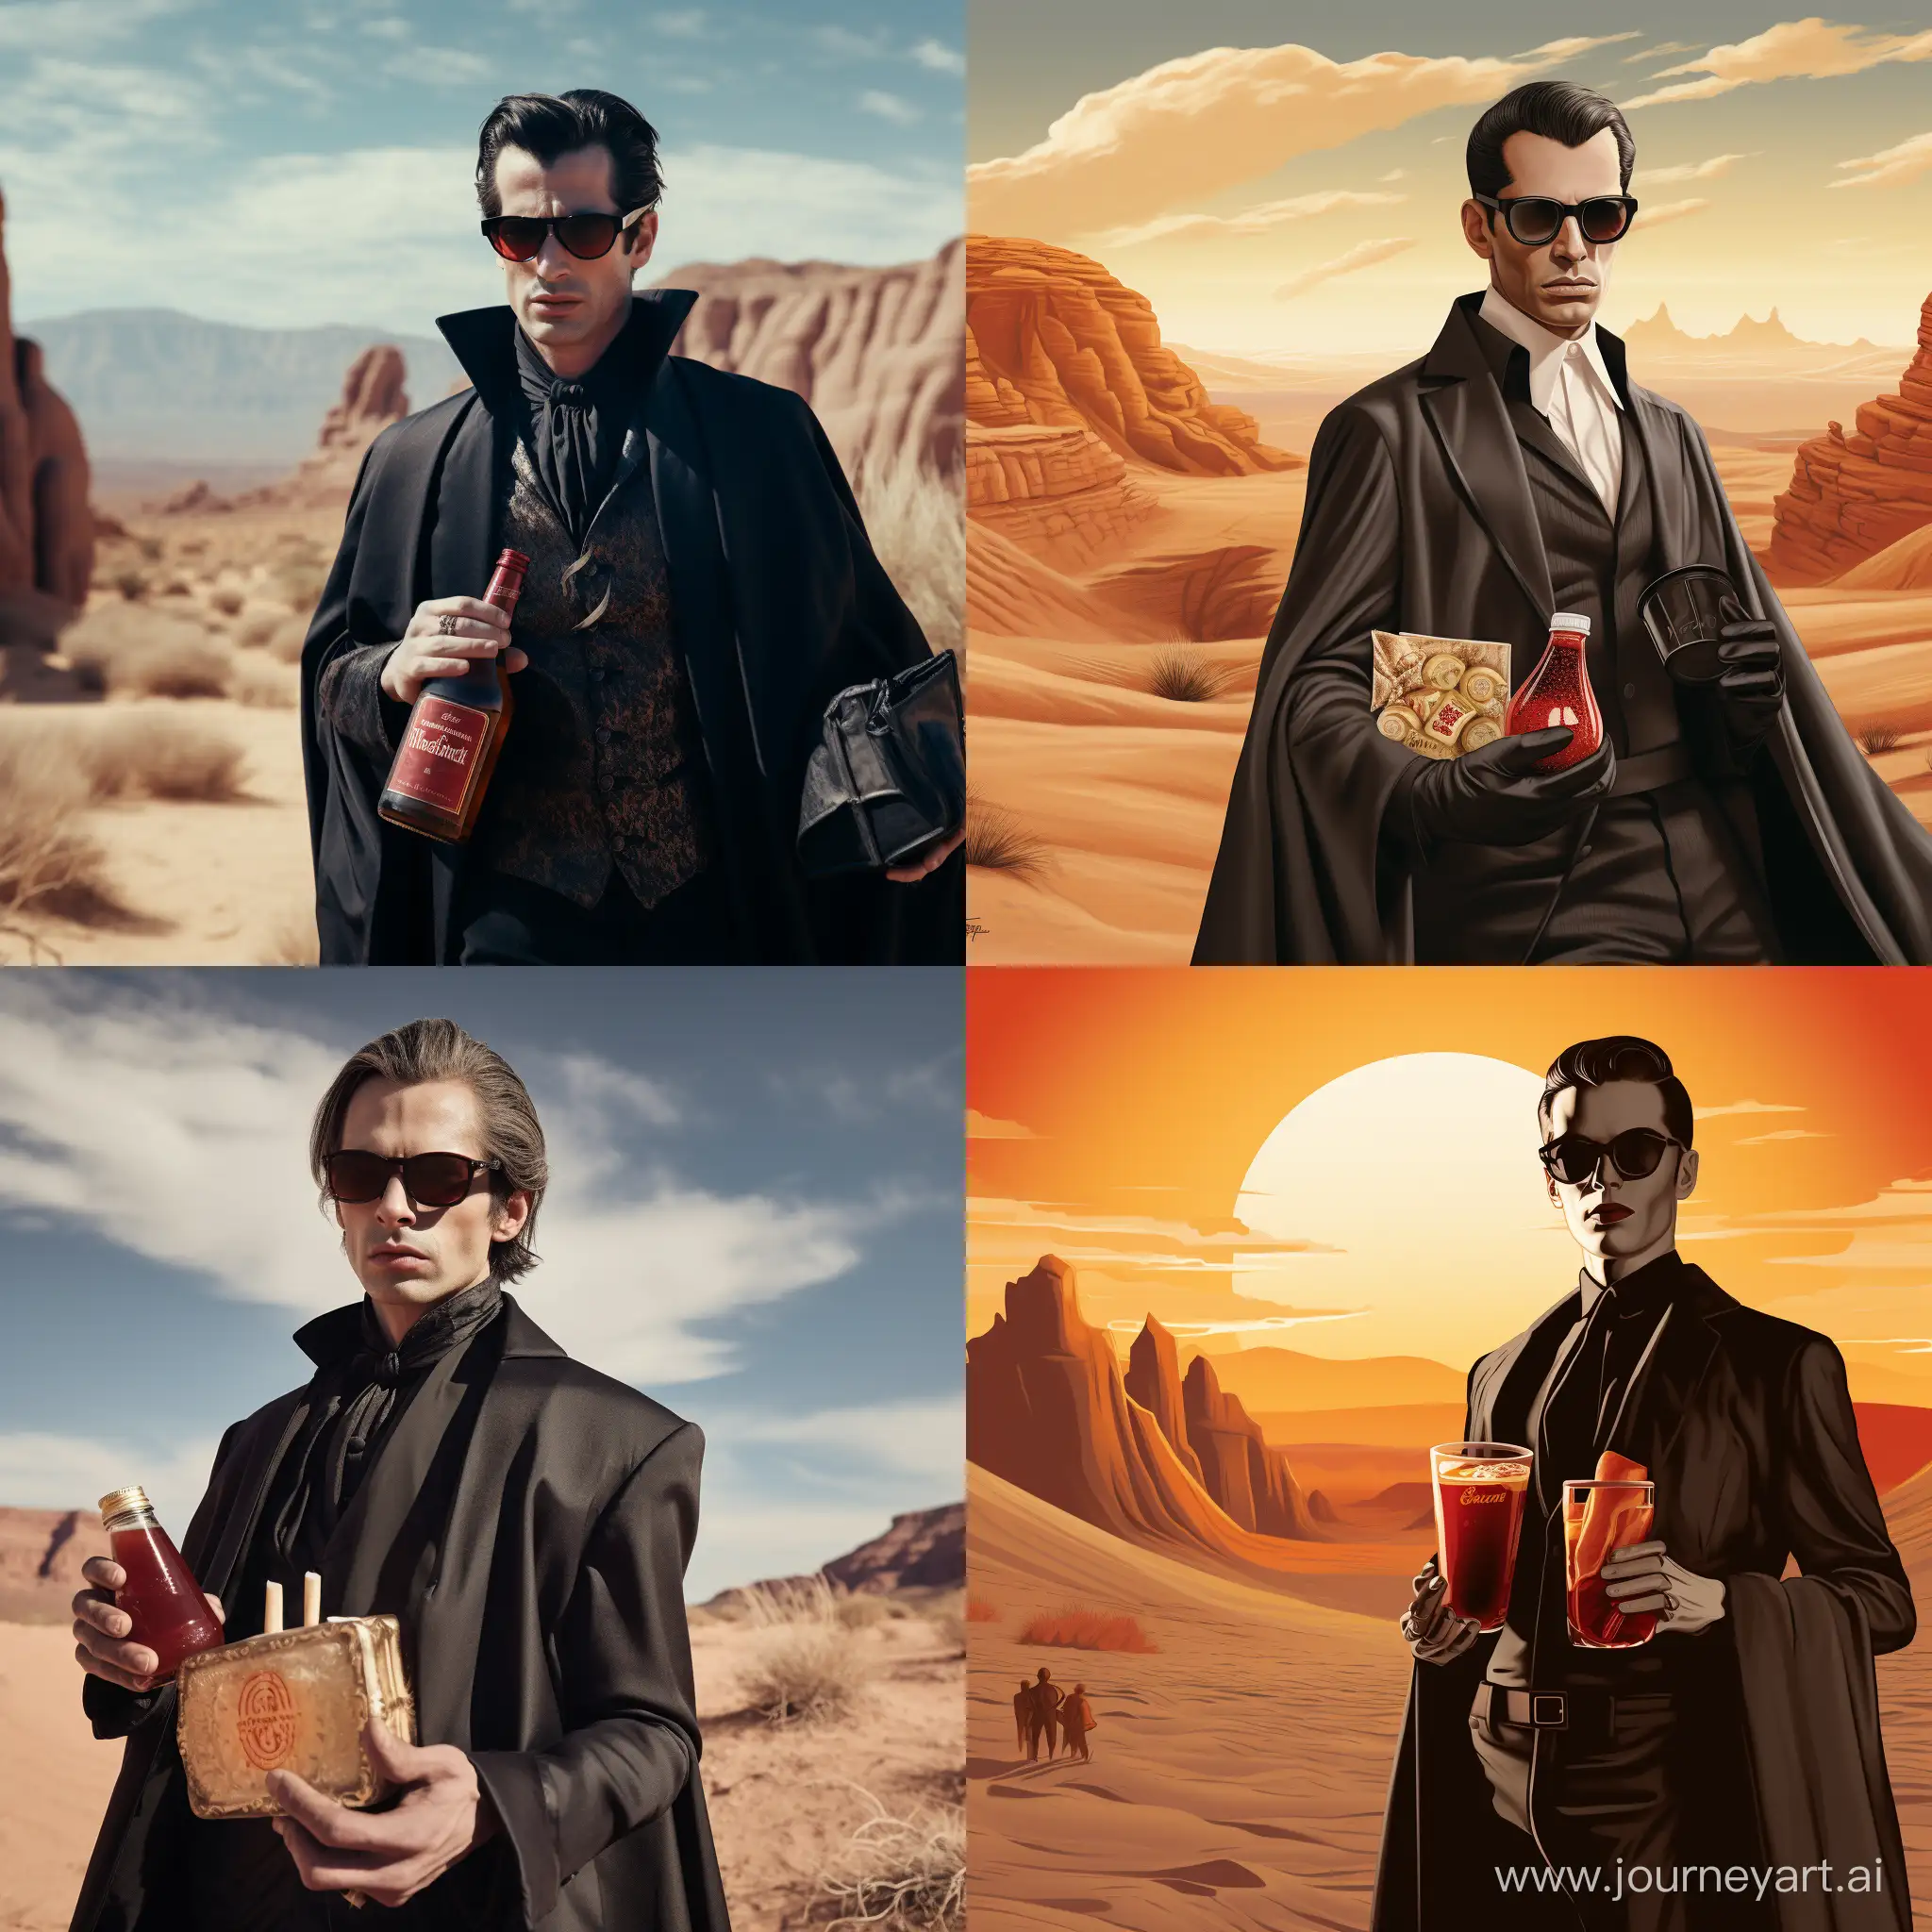 Count dracula wearing sunglasses walking through the desert with a bottle of hennessy and a pack of newport cigarettes